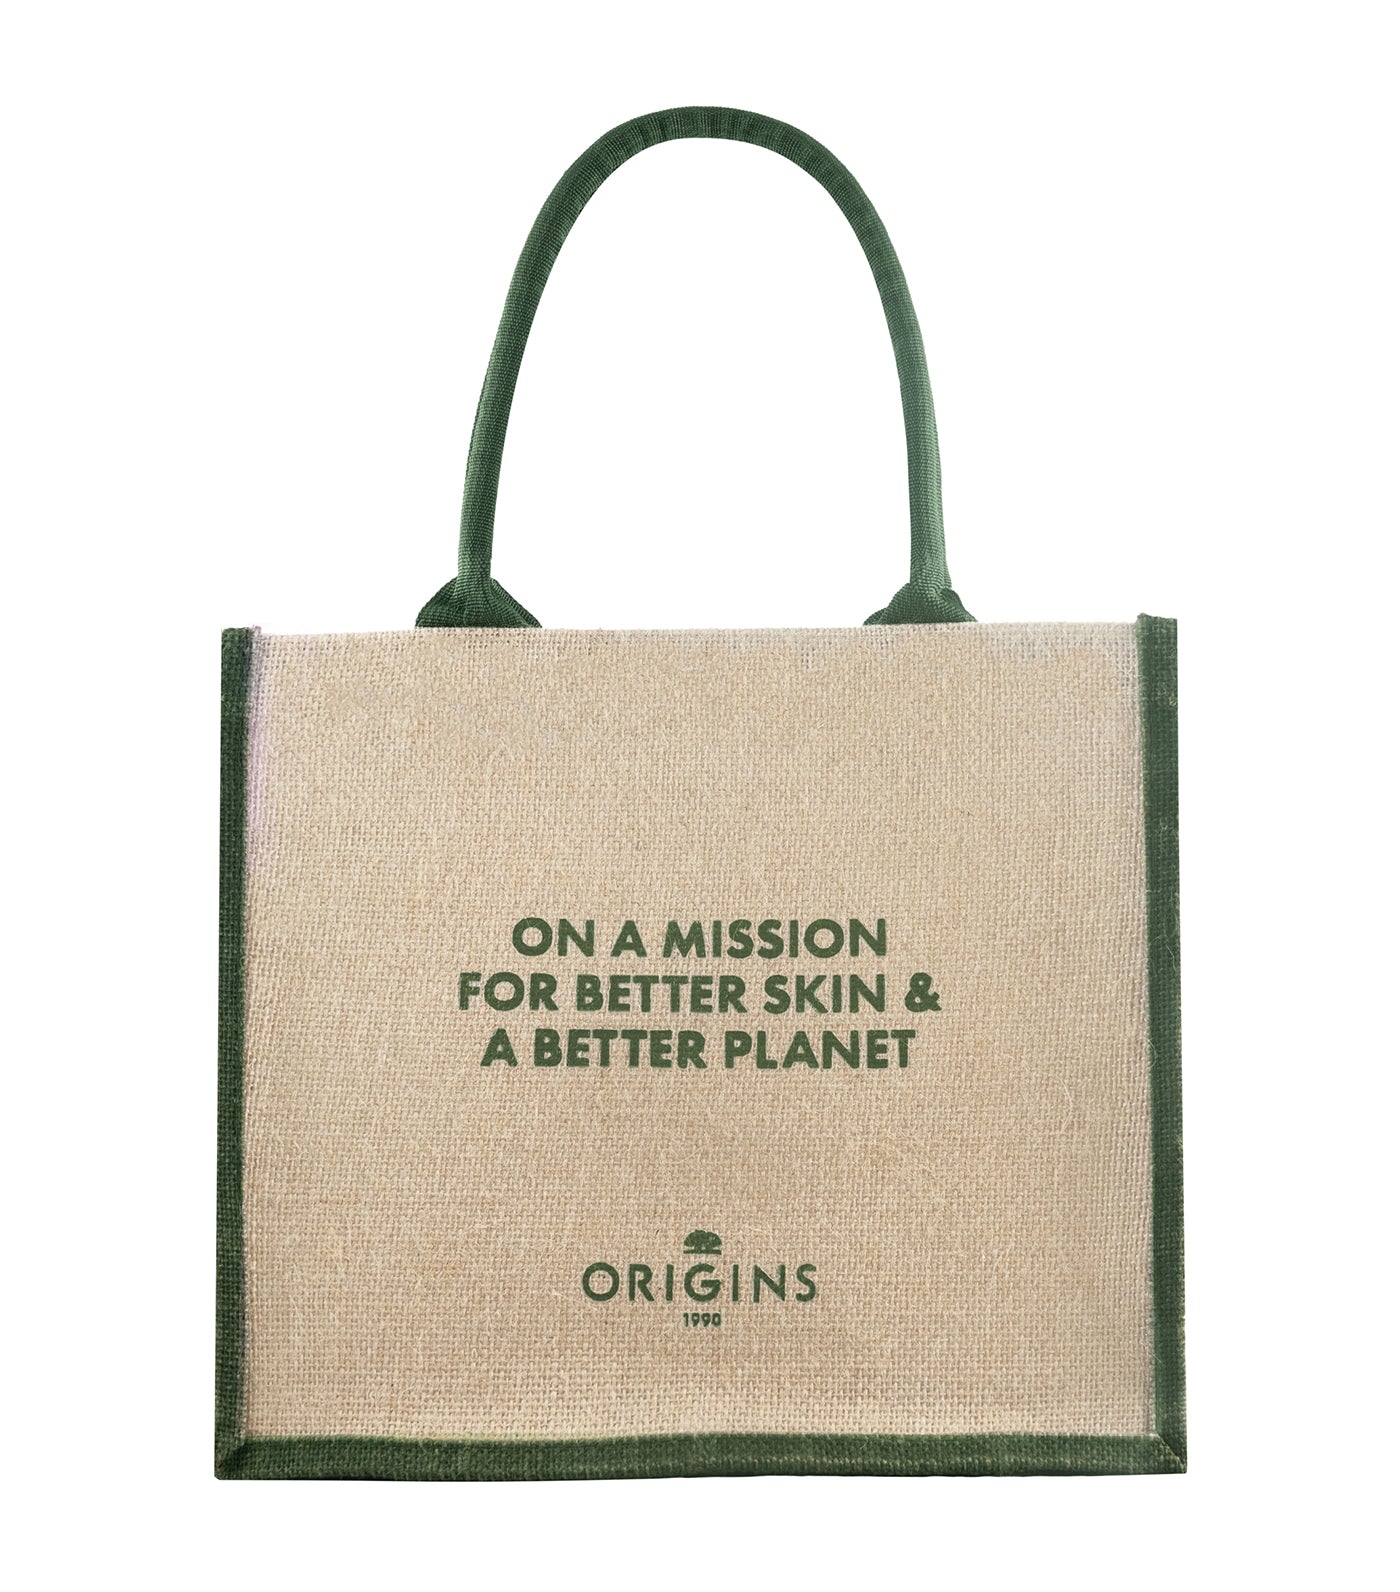 Complimentary Linen Tote Bag